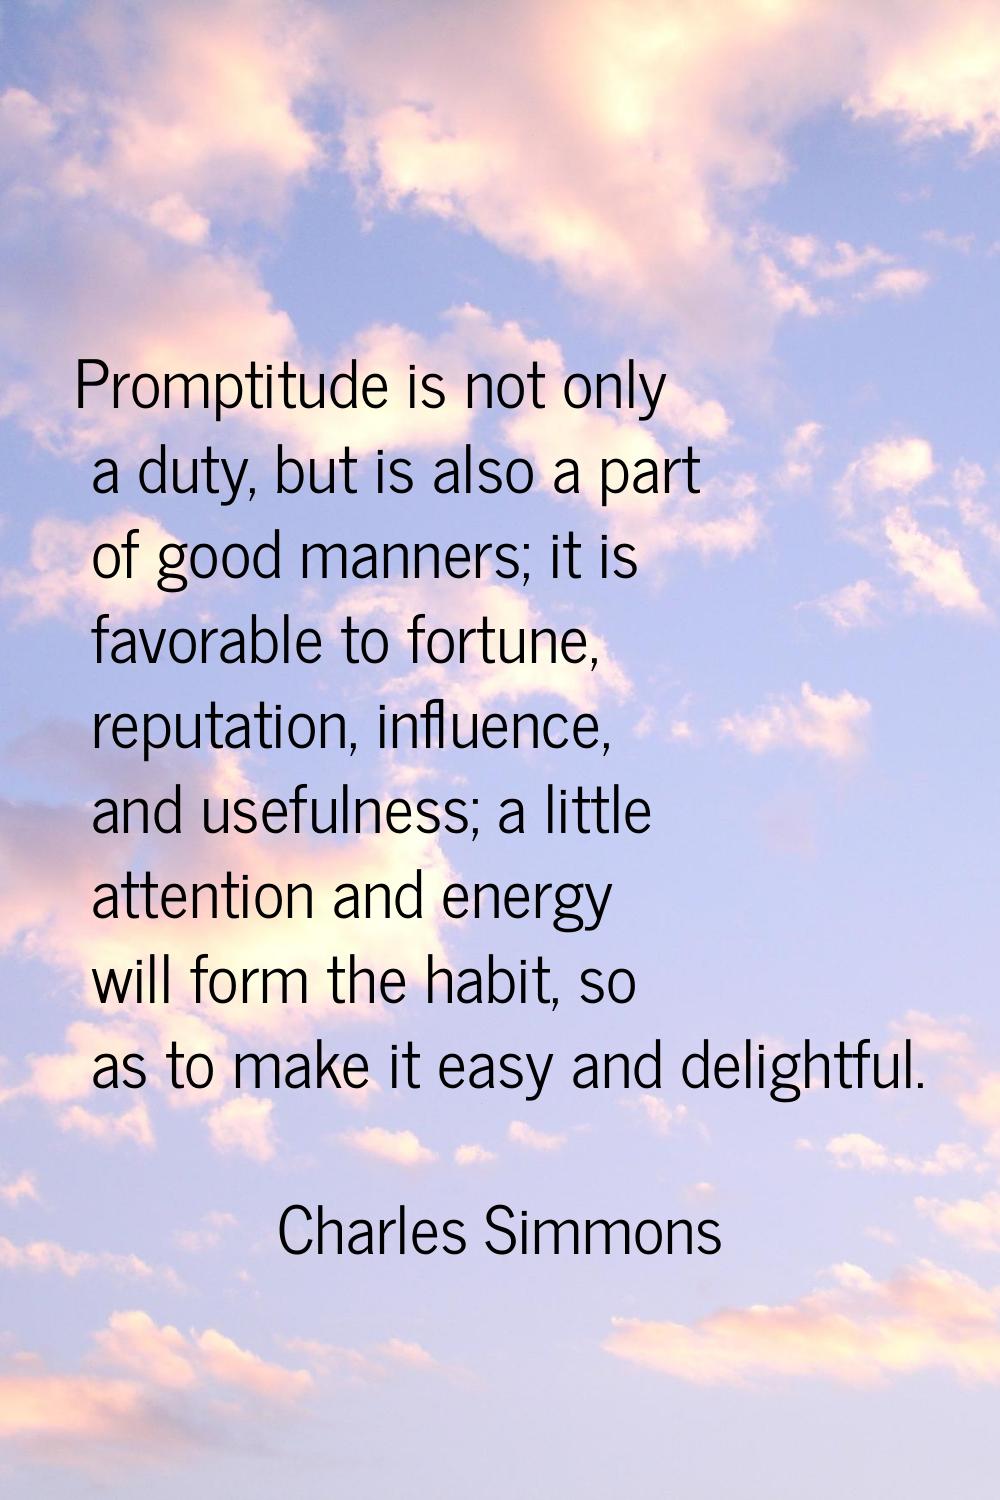 Promptitude is not only a duty, but is also a part of good manners; it is favorable to fortune, rep